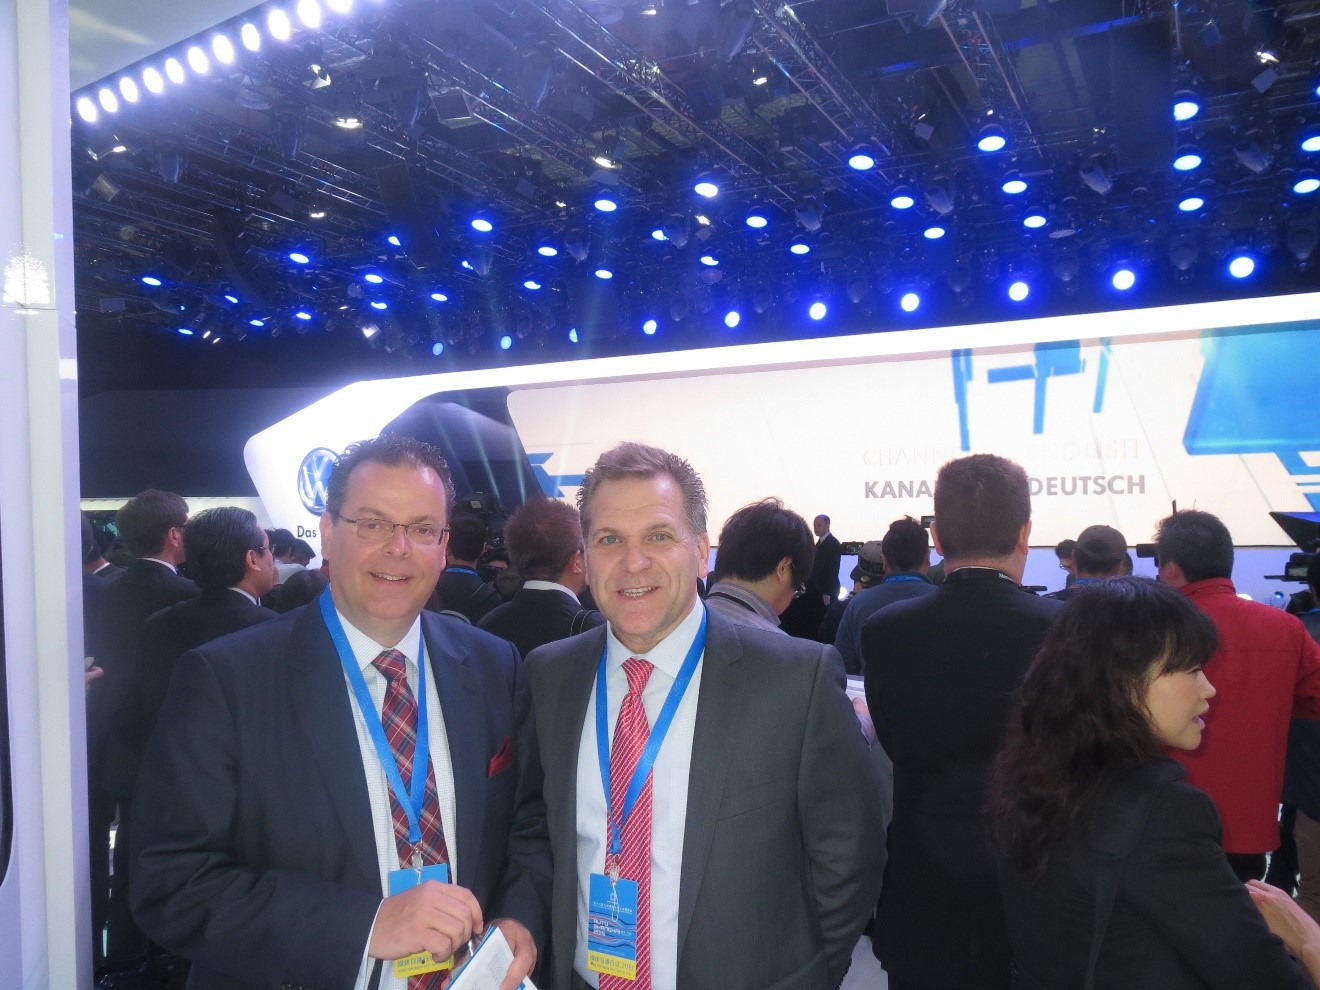 LIASE Group President and Managing Director Europe Wolfgang Doell (left) standing with LIASE Group Managing Director for the Americas John Bukowicz (right) in front of the Volkswagen stage at the 2015 Shanghai Auto Show.